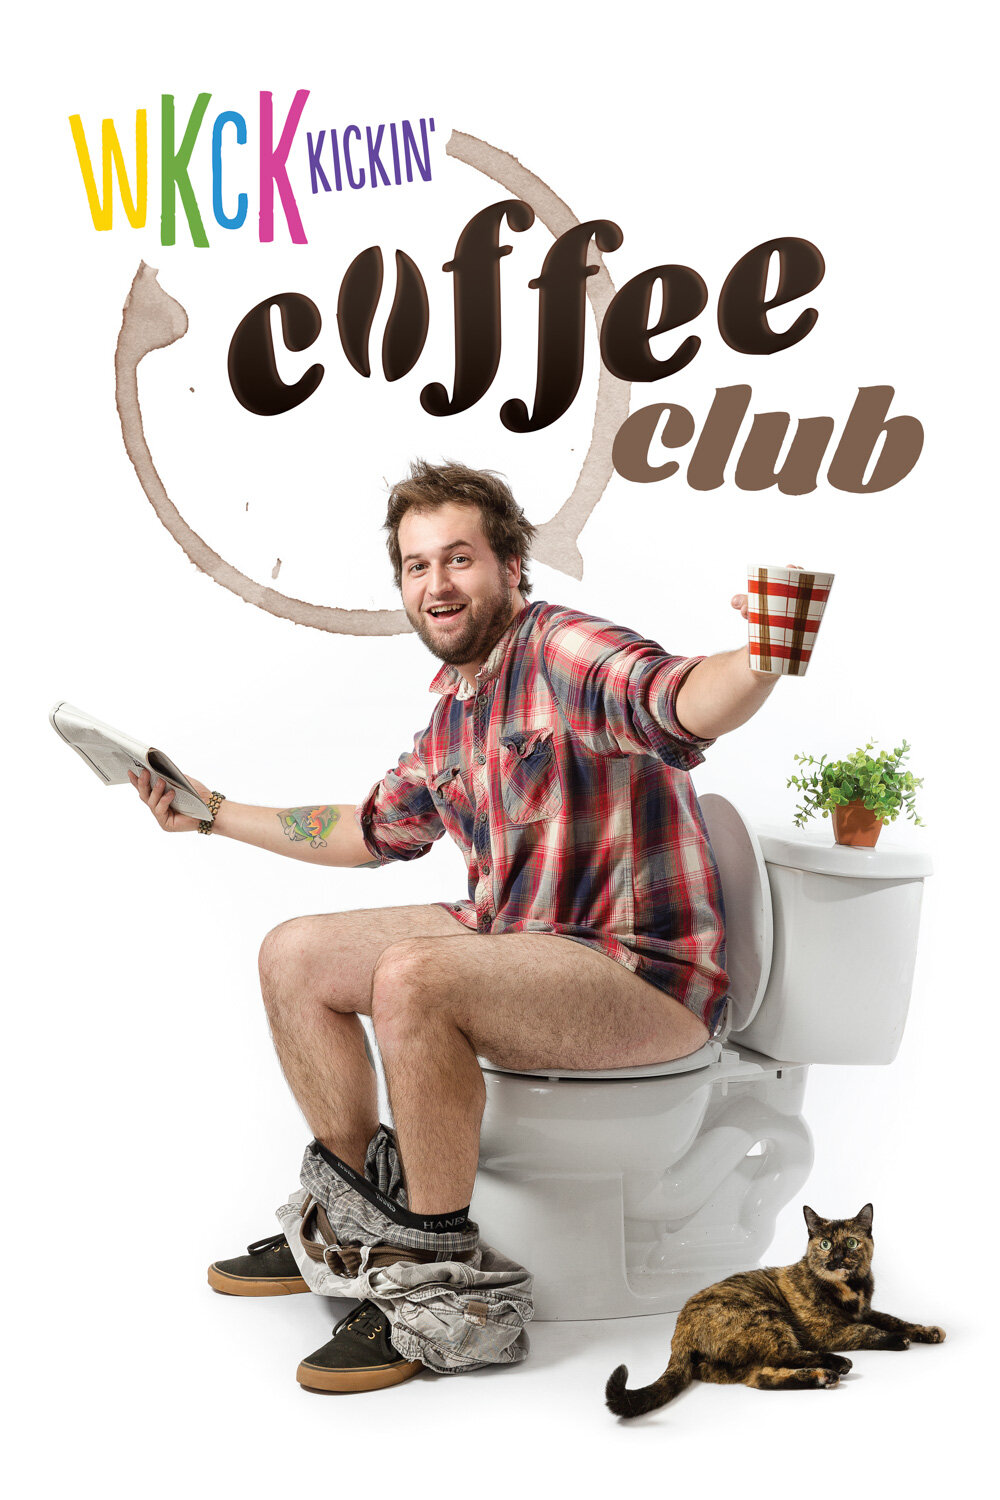 entertainer photographer Hanna Agar creates quirky portrait of radio personality sitting on a toilet with a cat and a coffee for director Aubrey Smyth's short film Ginger with a Snap